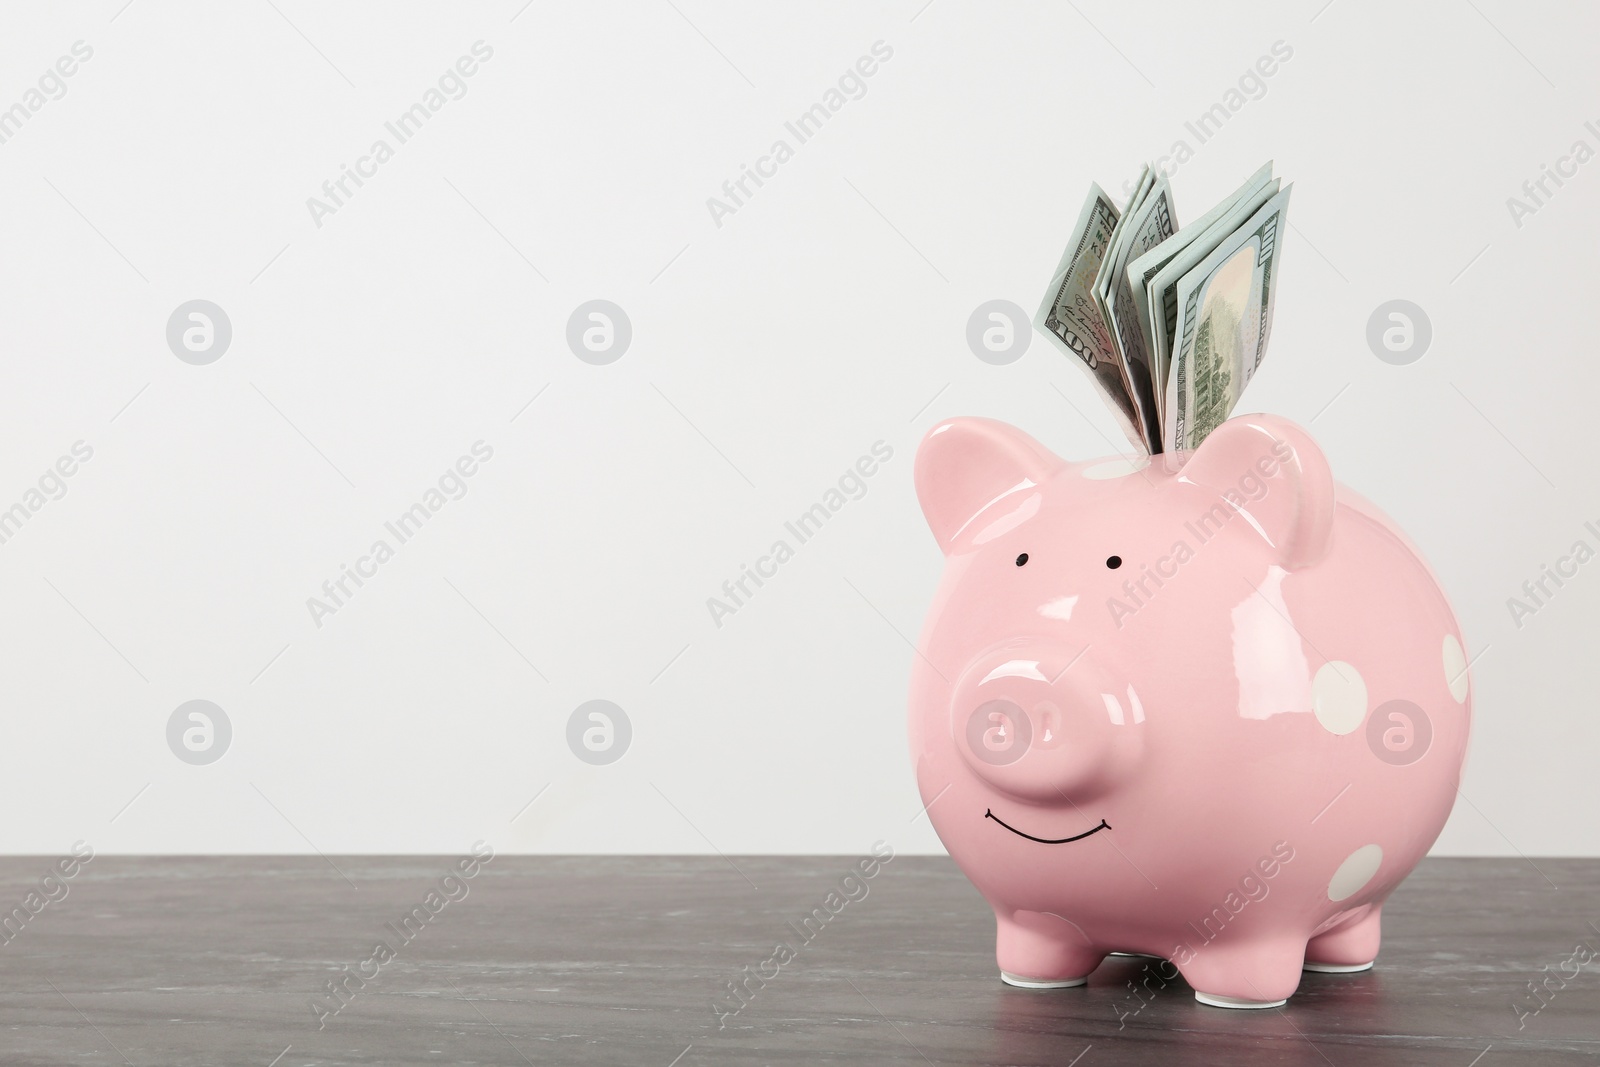 Photo of Piggy bank with dollar banknotes on table against white background. Space for text